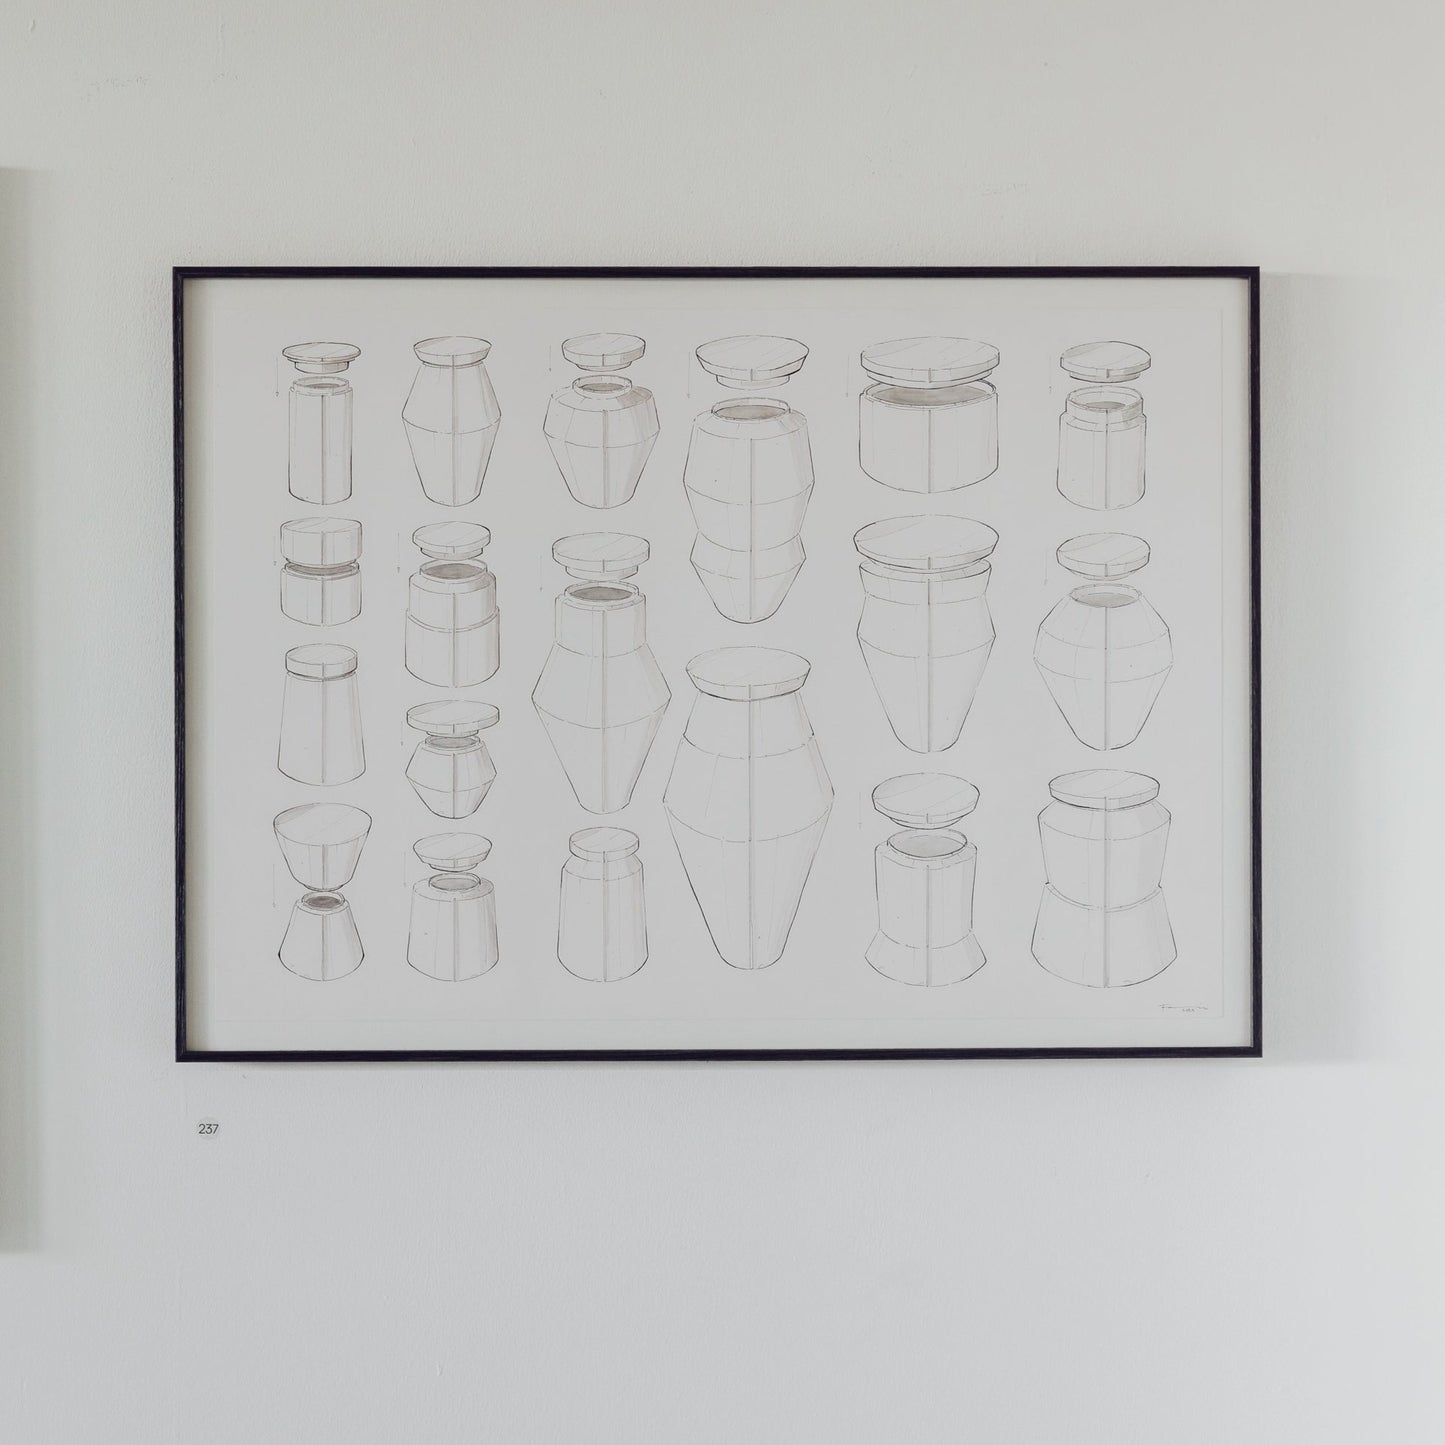 Florian Gadsby: Urns, Lids and Lines Original Drawing